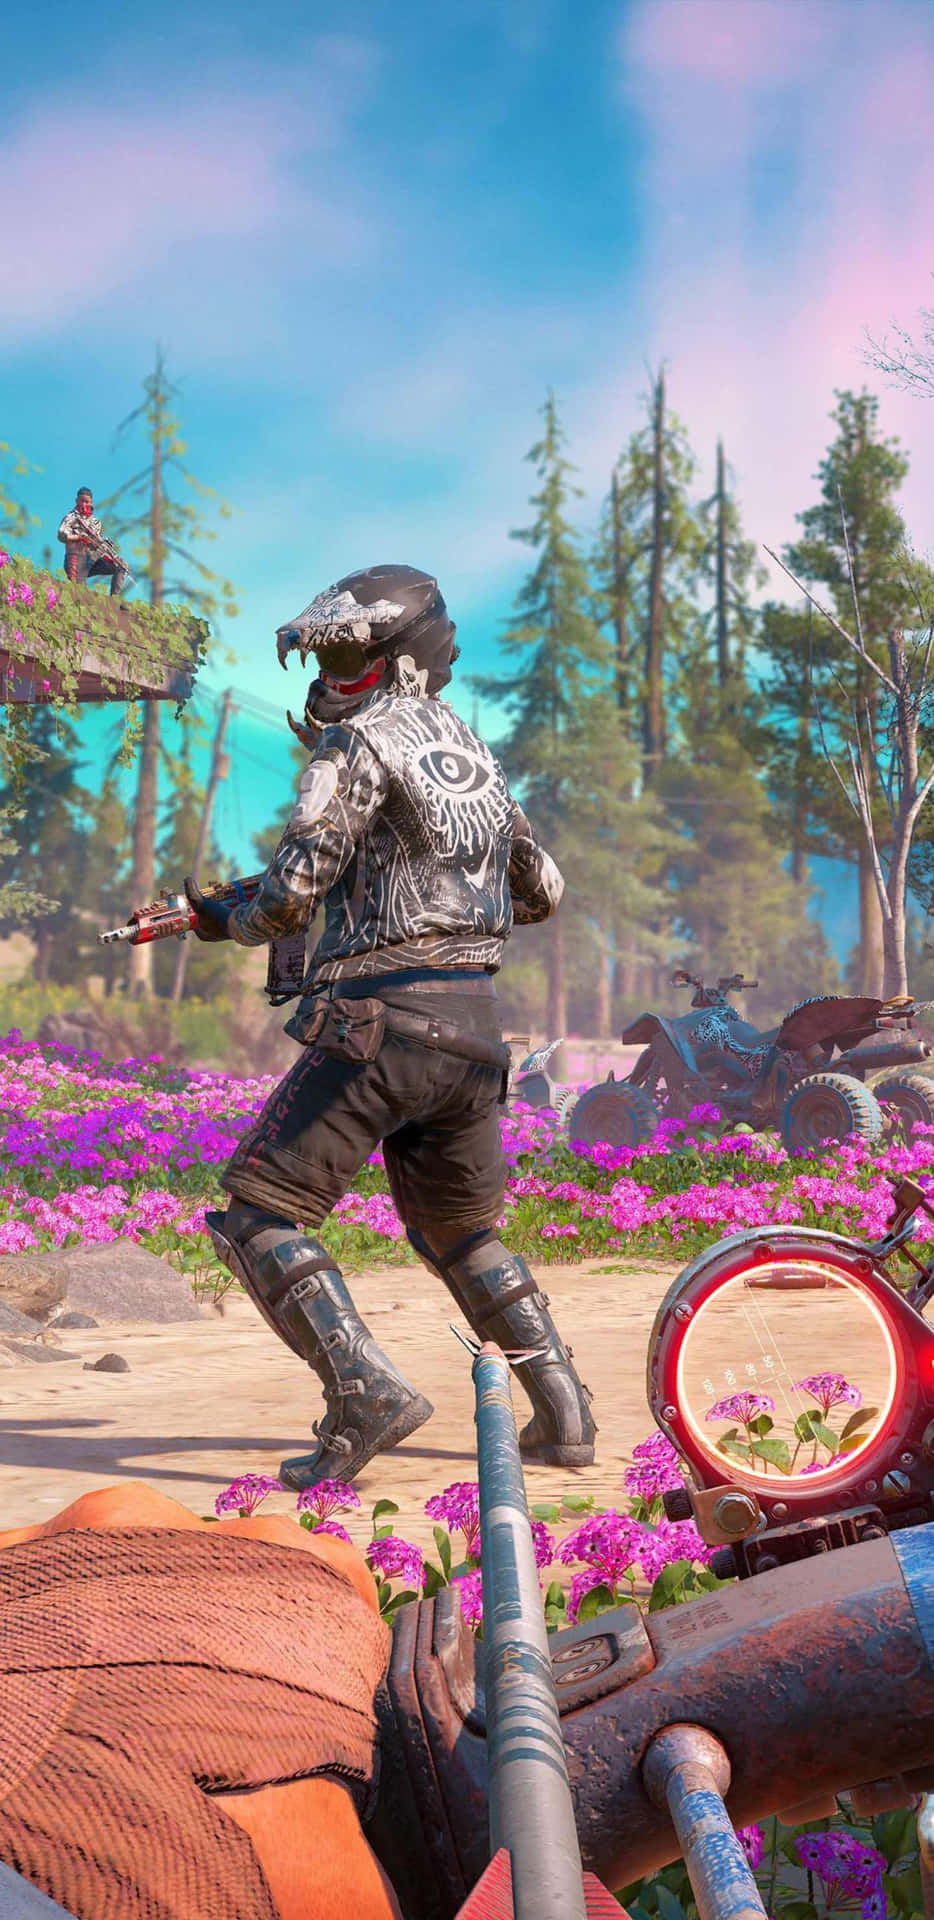 Join the fight in the post-apocalyptic world of Far Cry New Dawn